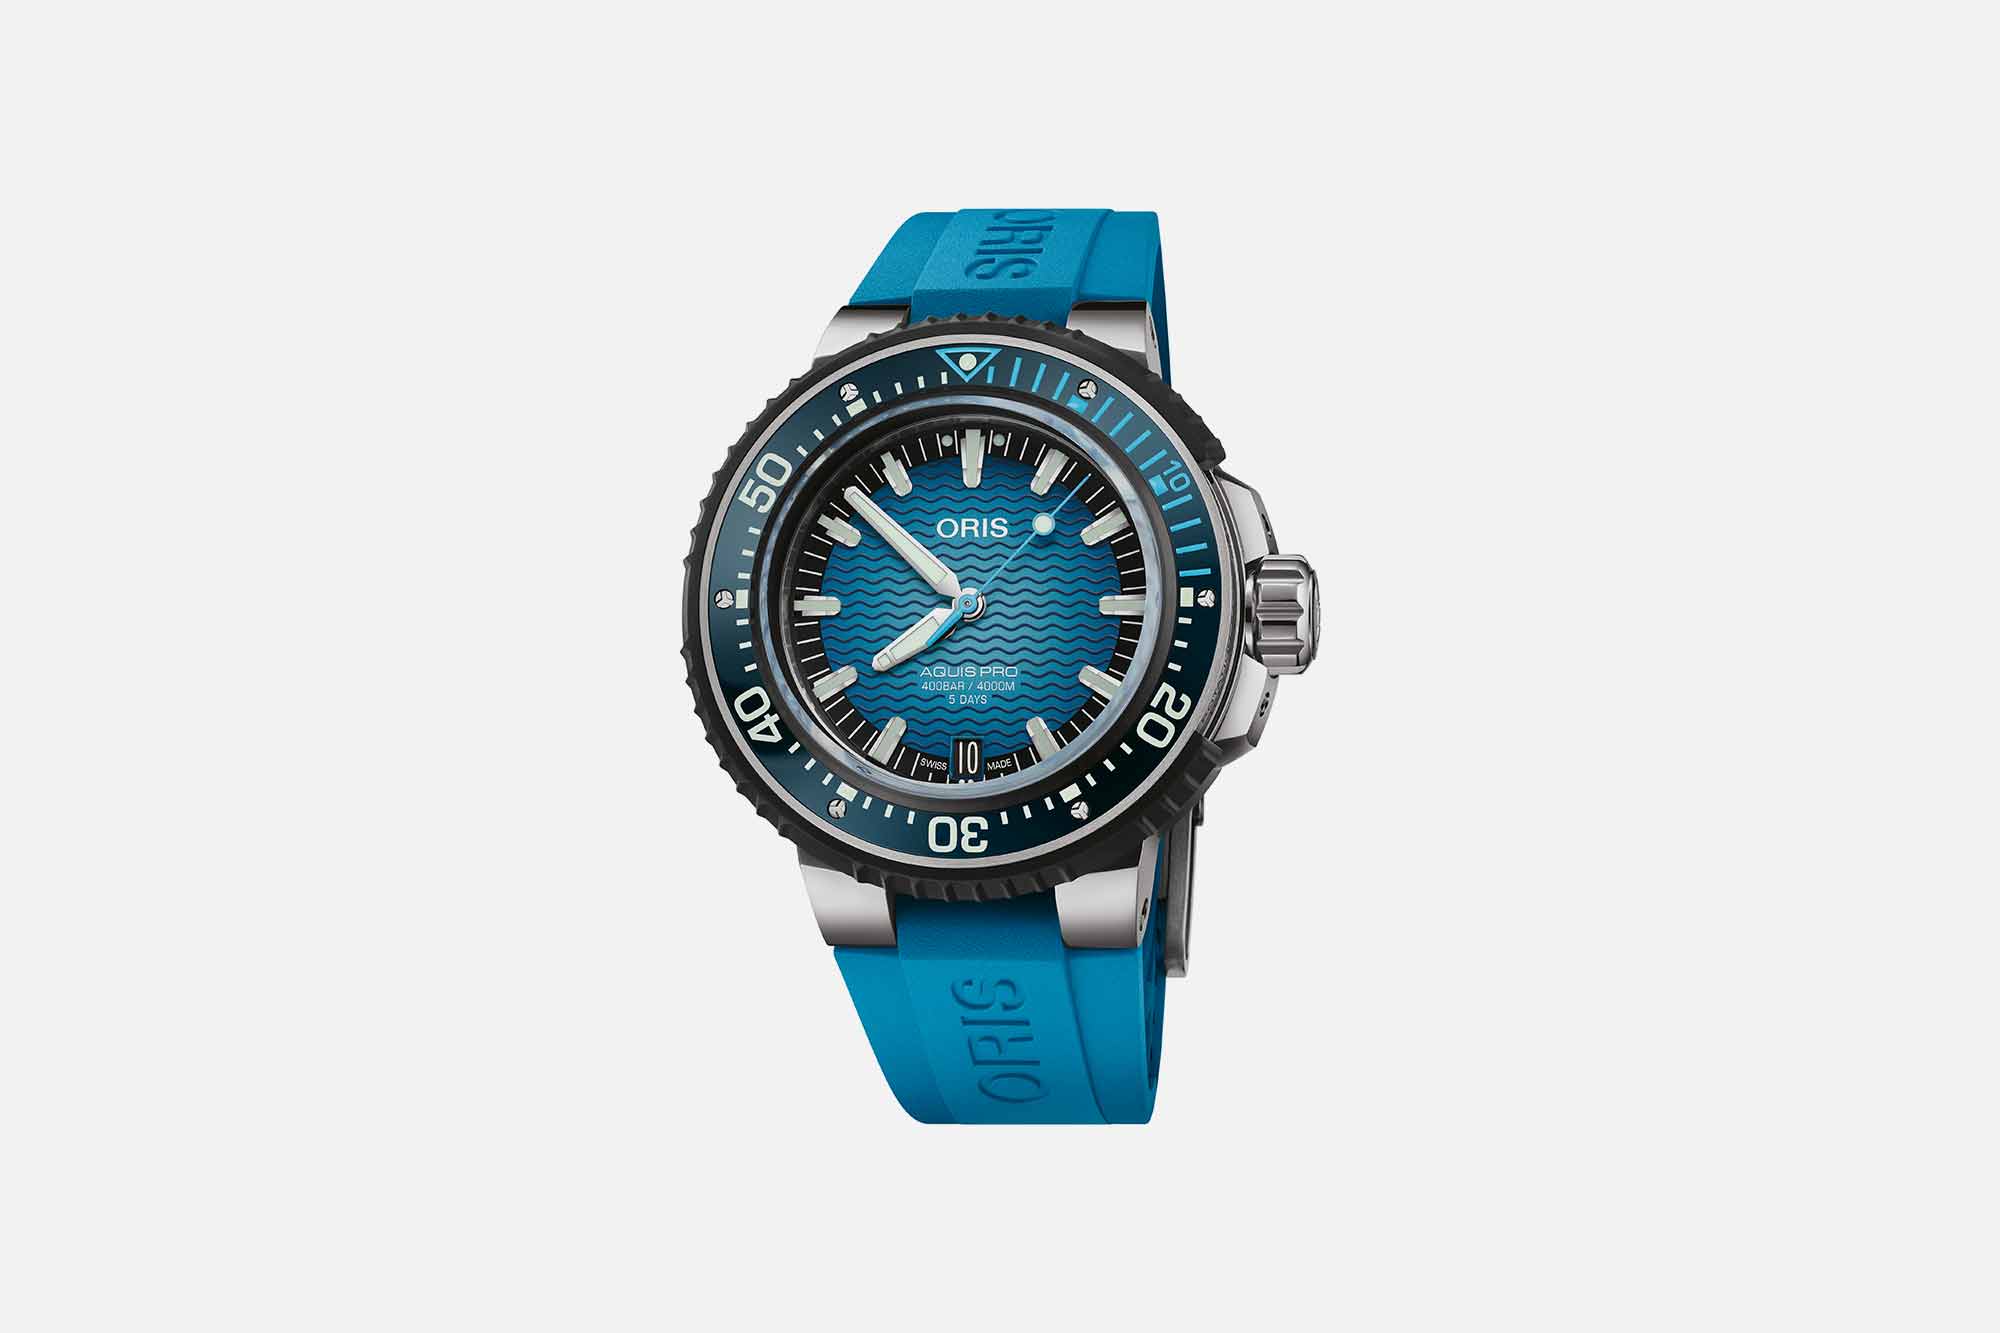 Oris Goes Deeper than Ever with the All New AquisPro 4000m